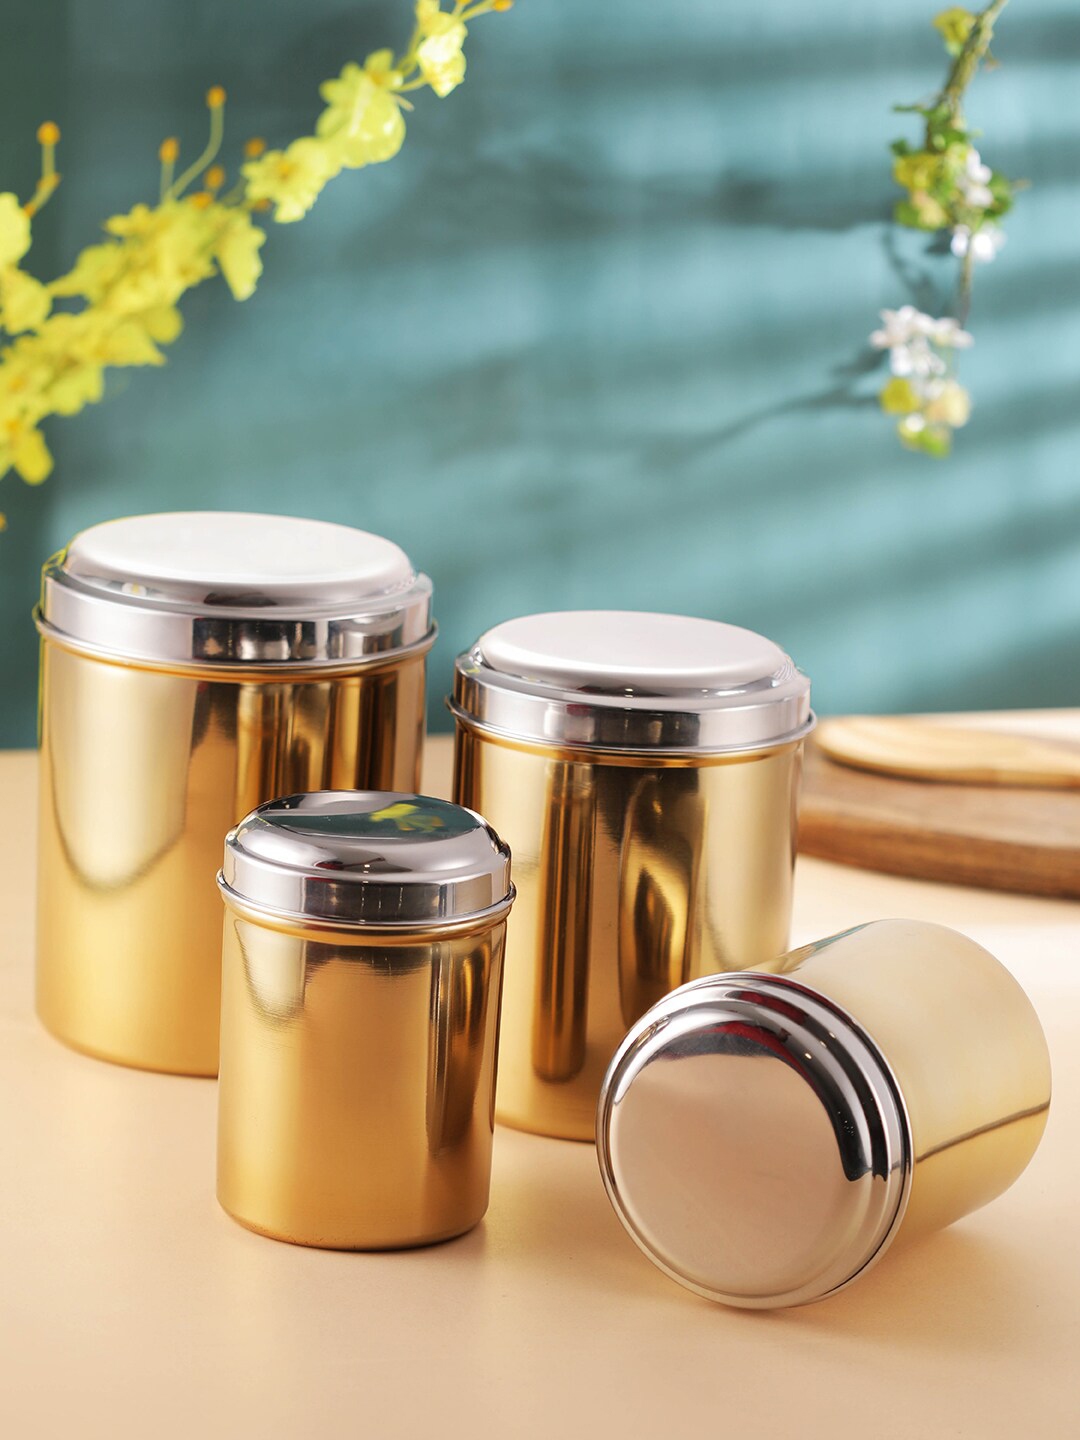 Jensons Set Of 12 Gold & Silver-Toned Solid Stainless Steel Canisters